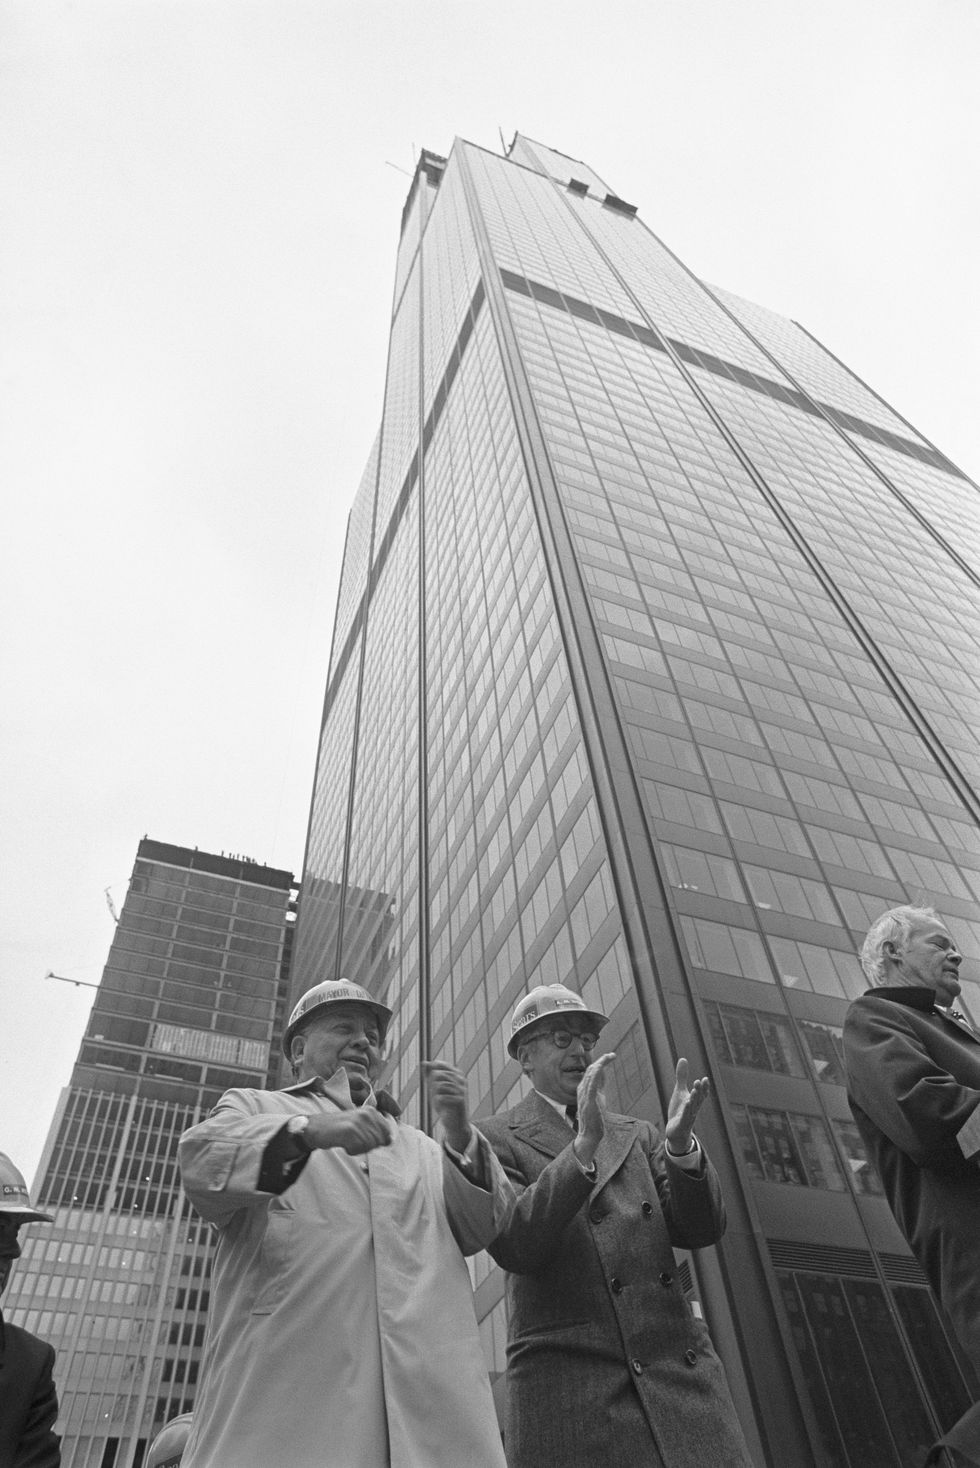 richard daley and arthur wood applauding sears tower completion